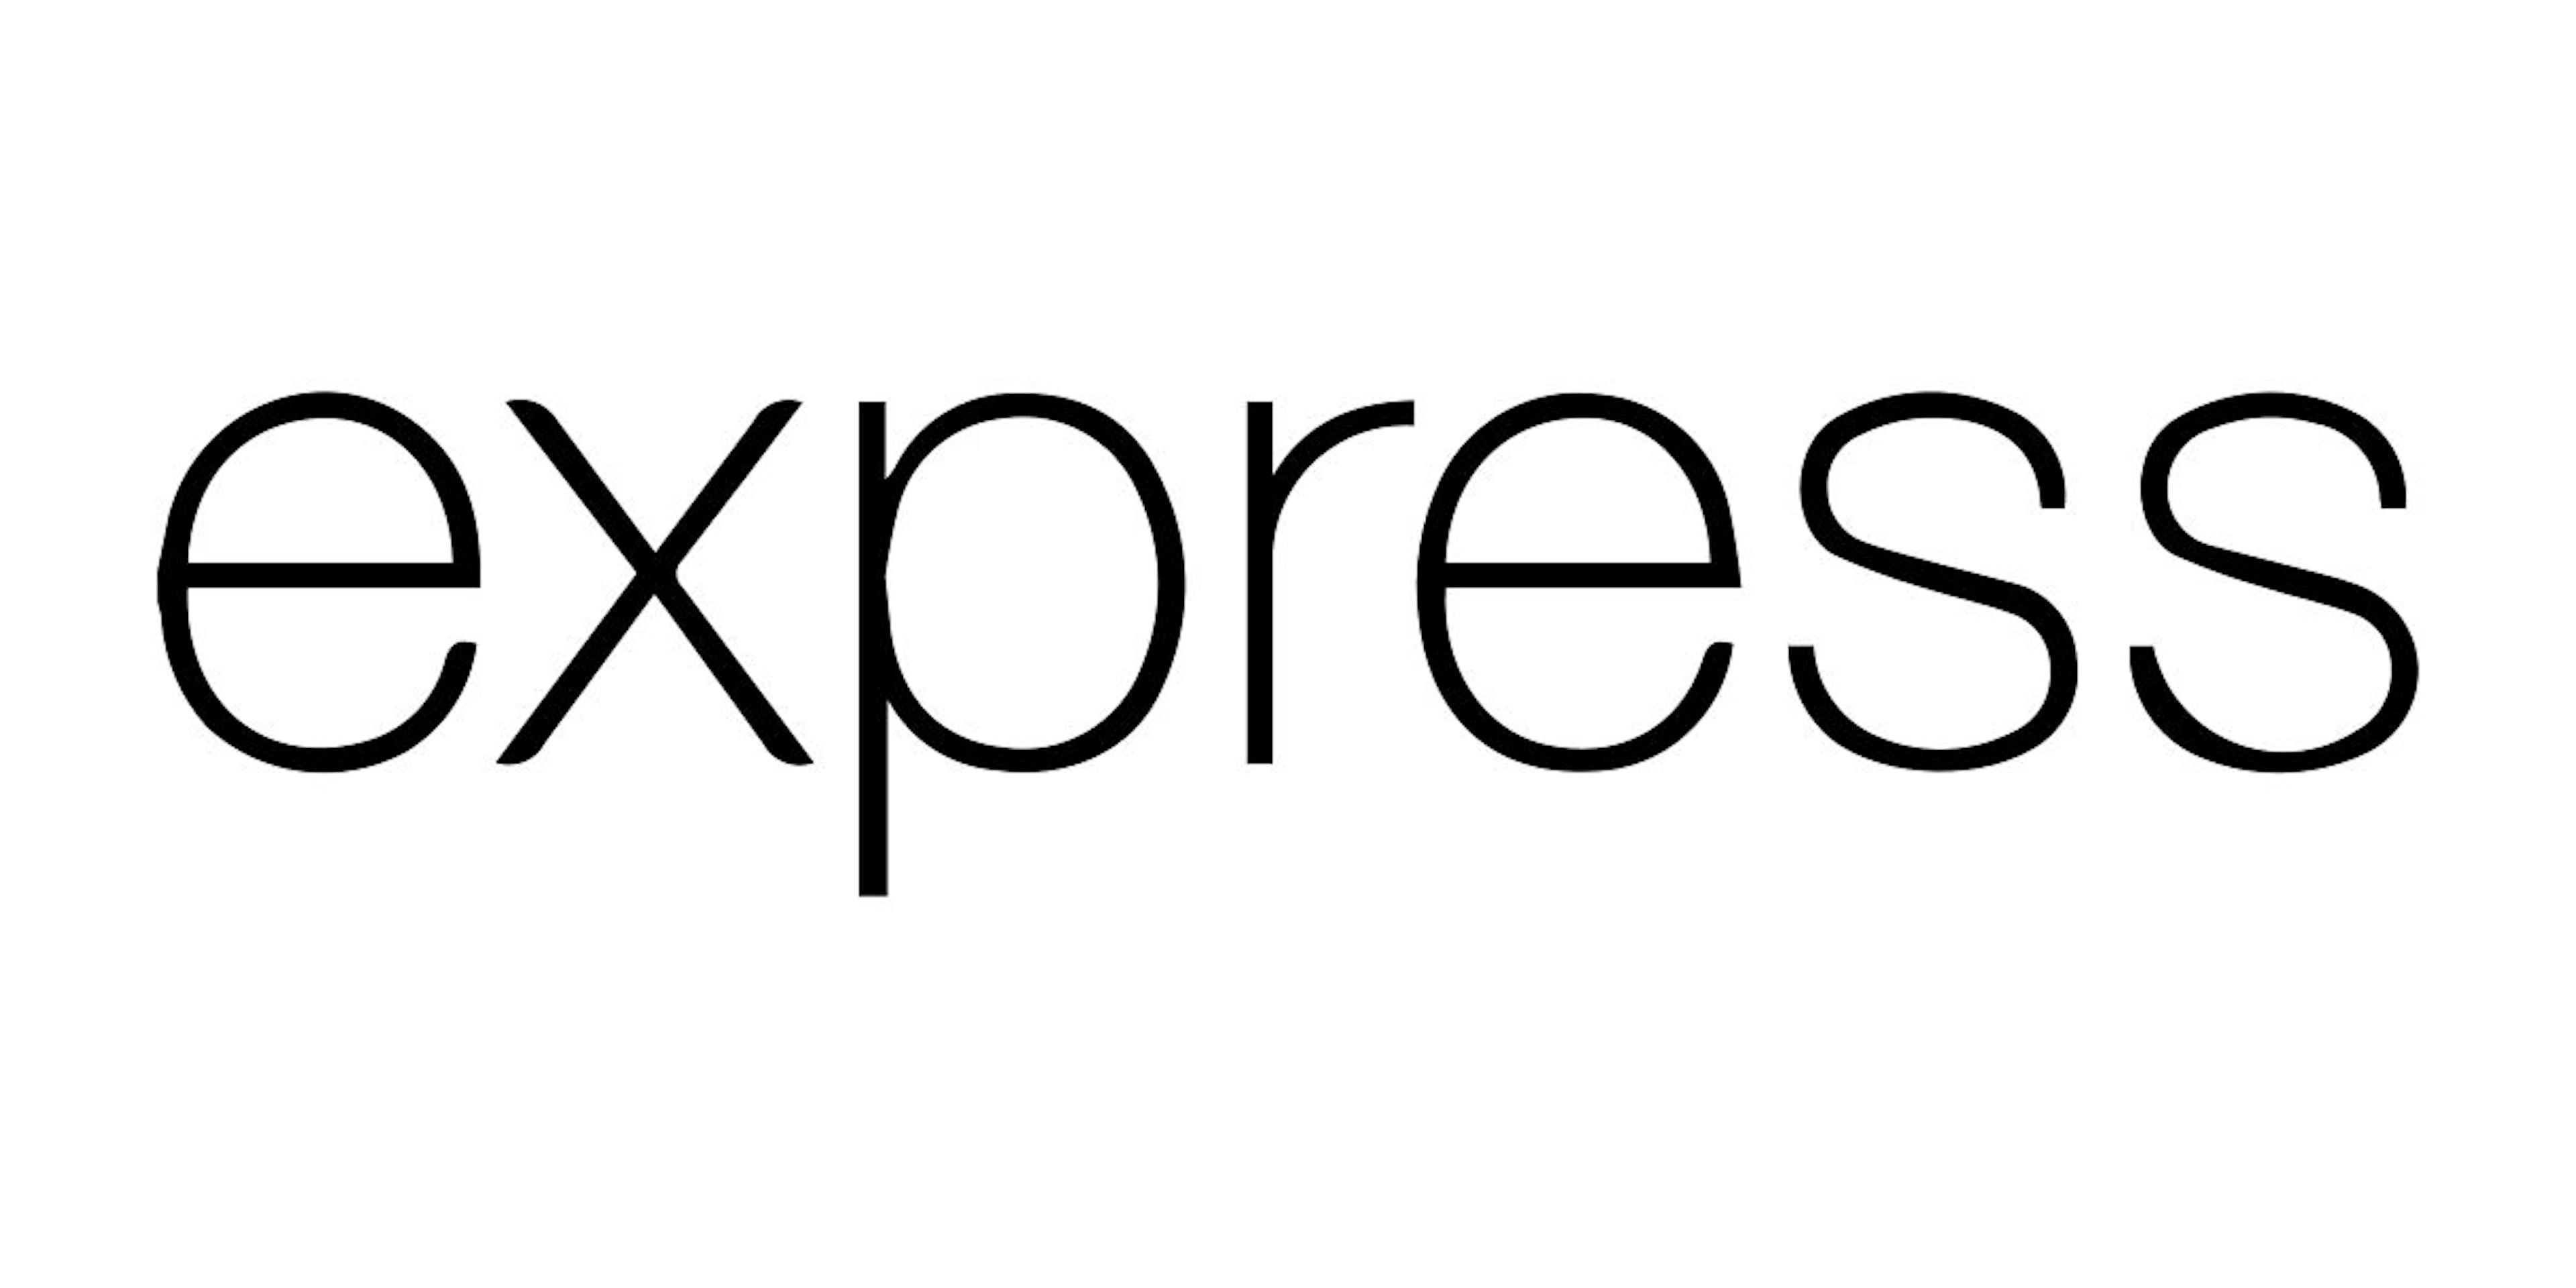 featured image - Effective Use Of Middleware In Express.js: Practical Approaches